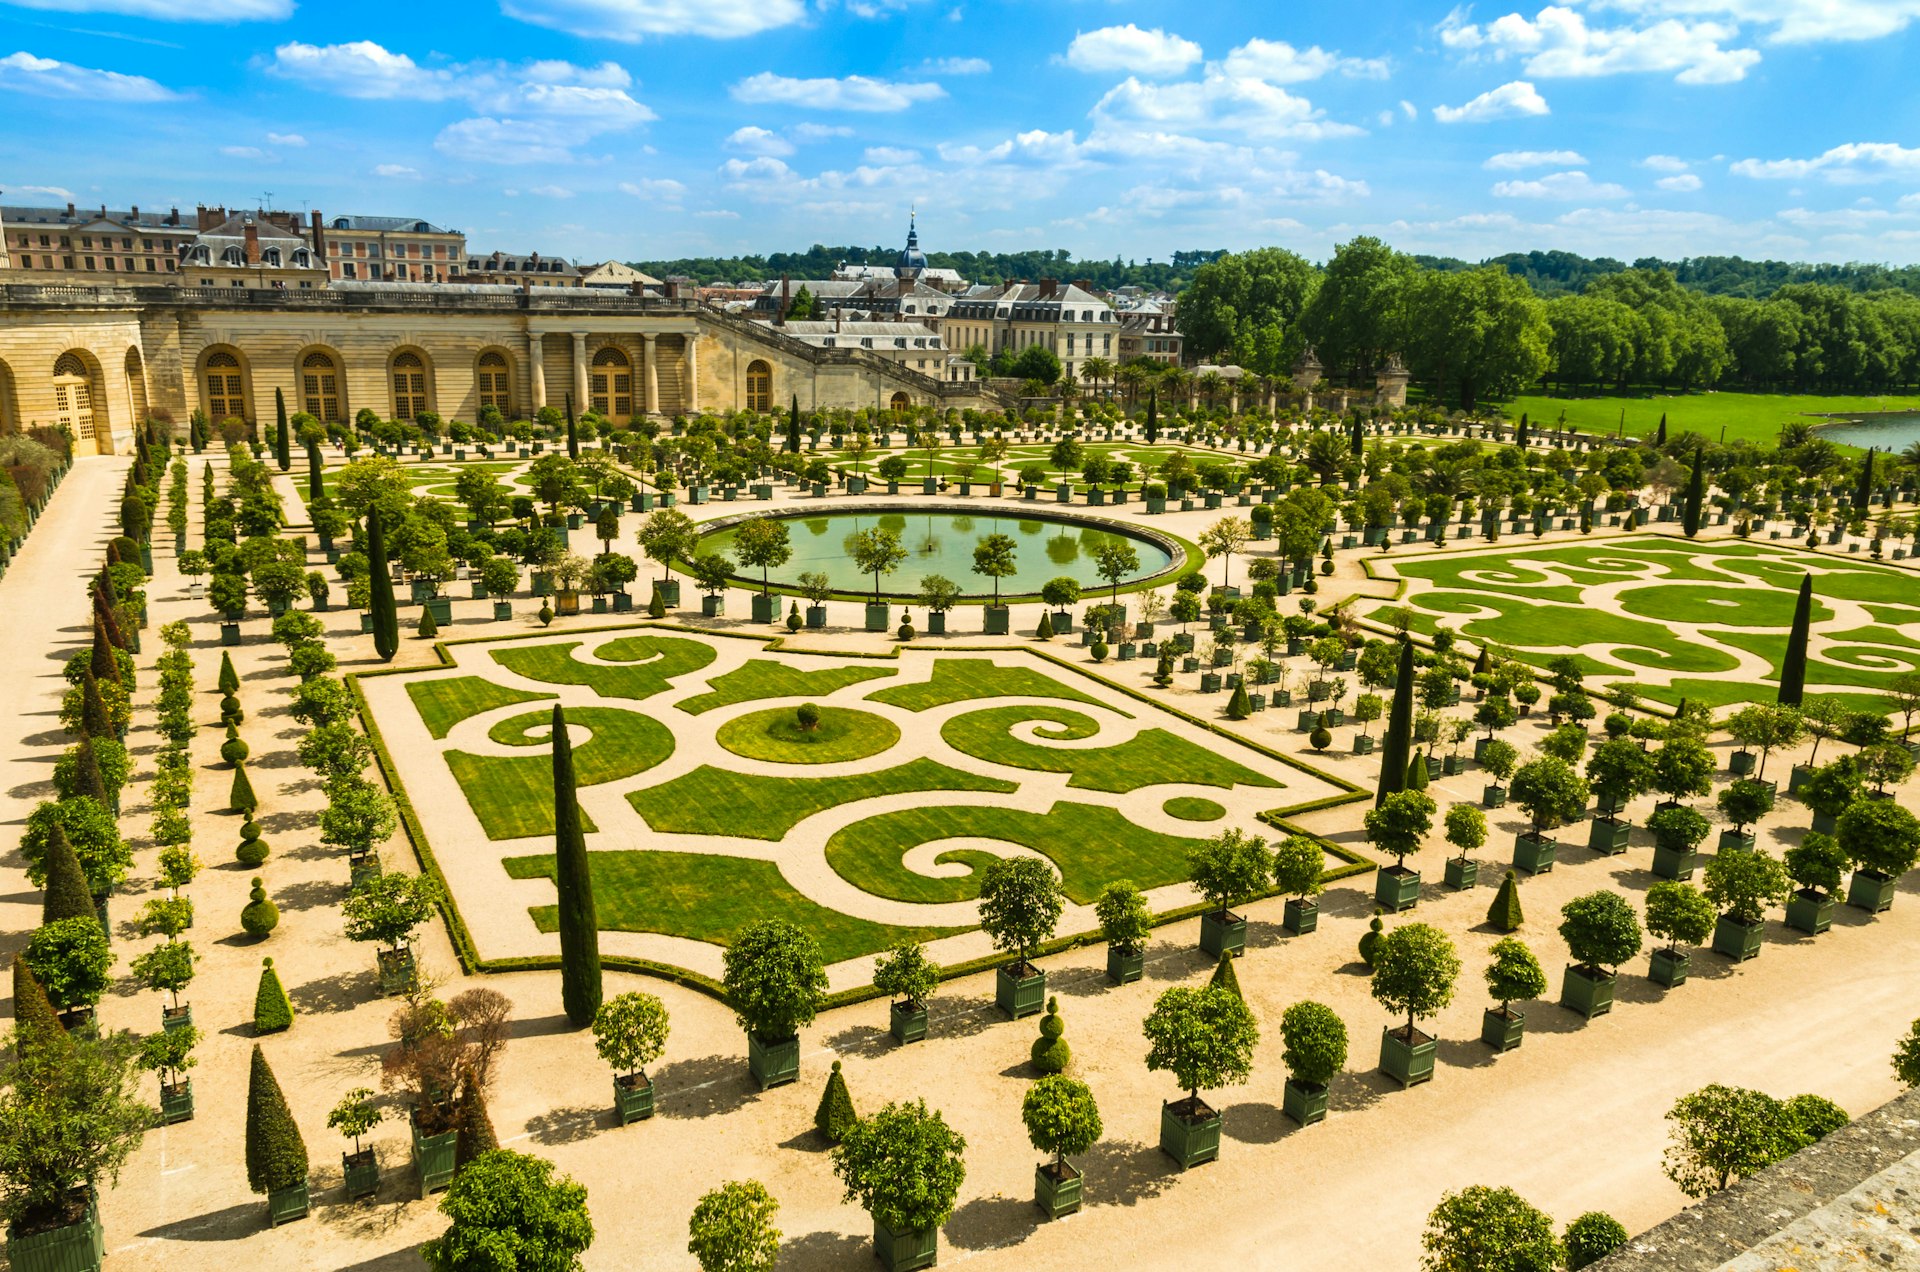 High-angle view of the manicured gardens at the Palace of Versailles, with decorative topiary and water features